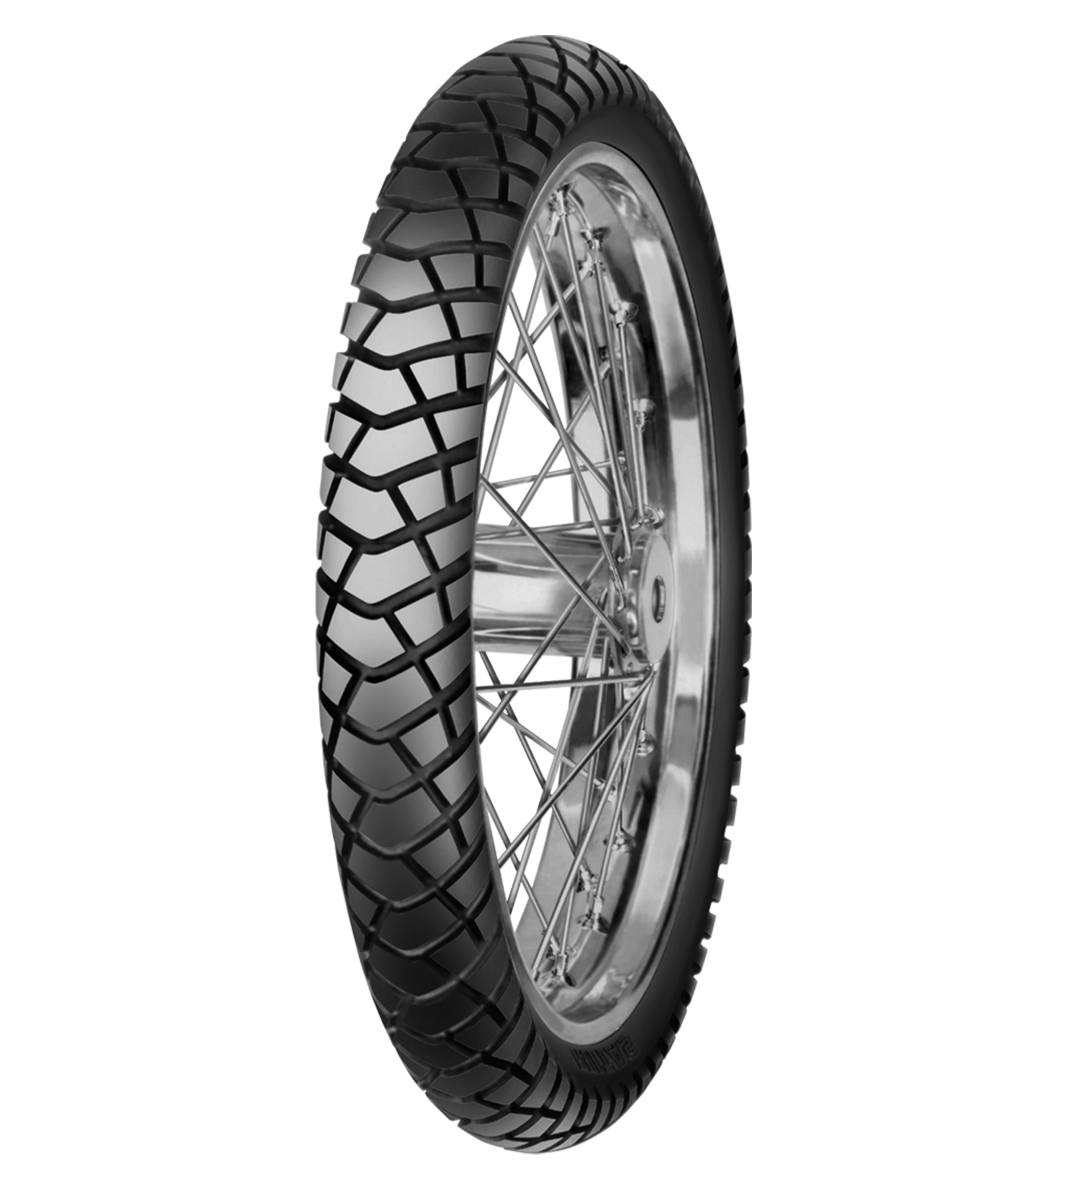 Mitas E-08 ENDURO 90/90-21 Trail ON Trail 54T No Stripe Tubeless Front Tire, 224642, 90/90-21, Adventure Touring, E Series, E-08 Enduro, Front, Trail, Trail ON, Tires - Imported and distributed in North & South America by Lindeco Genuine Powersports - Premier Powersports Equipment and Accessories for Motorcycle Enthusiasts, Professional Riders and Dealers.